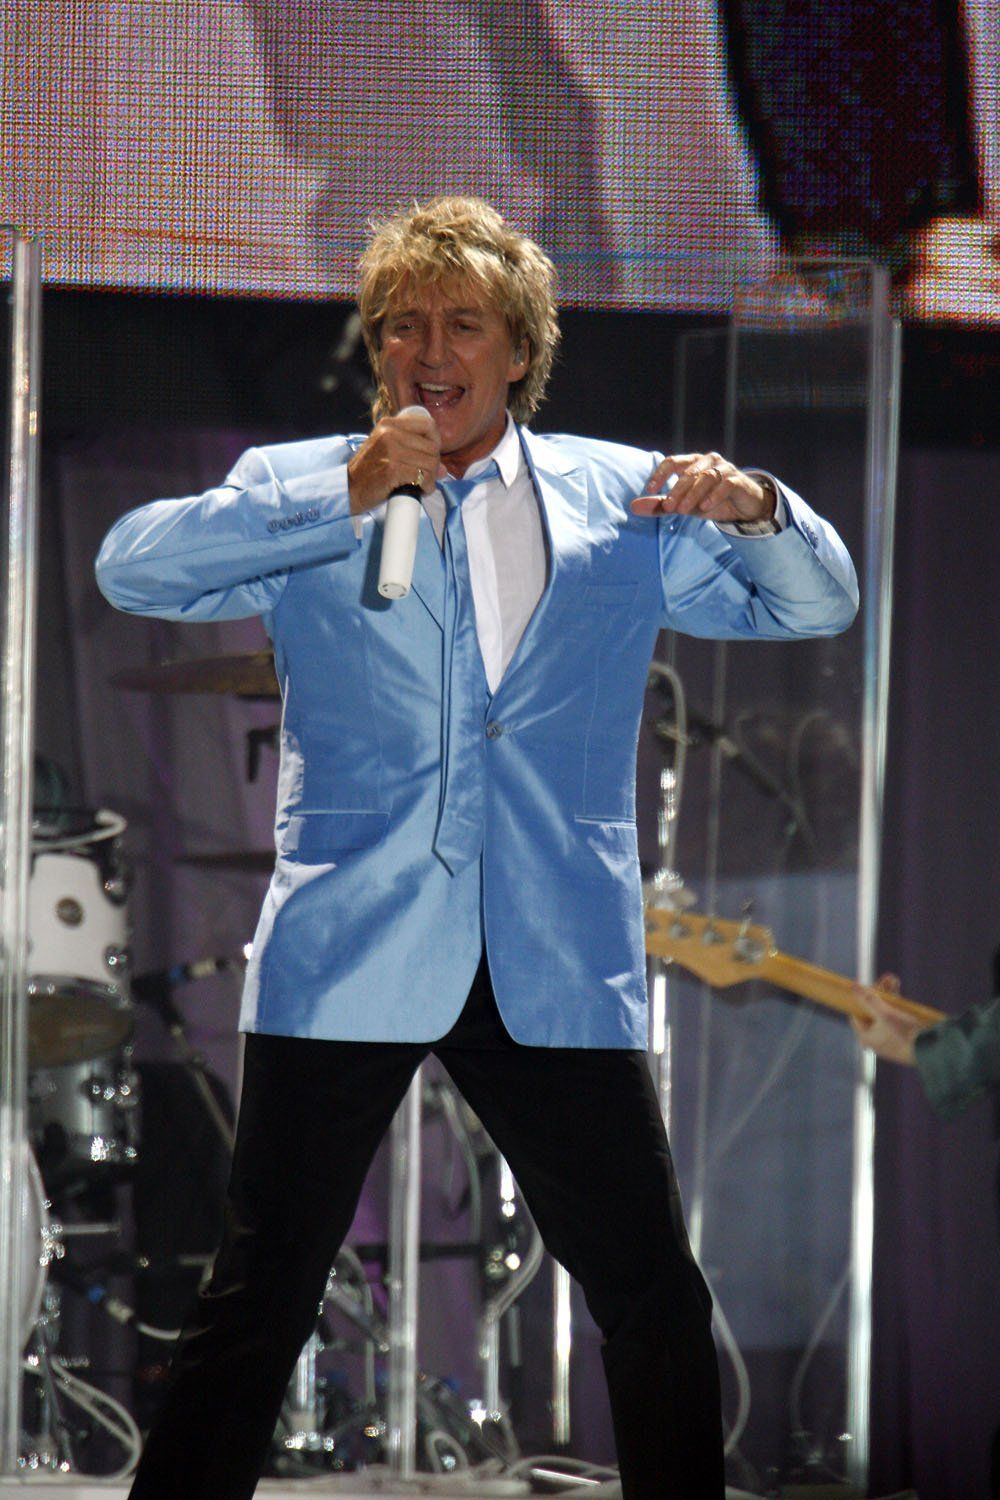 Rod Stewart @ Plymouth Home Park 2nd July 2009 - www.leapimages.co.uk